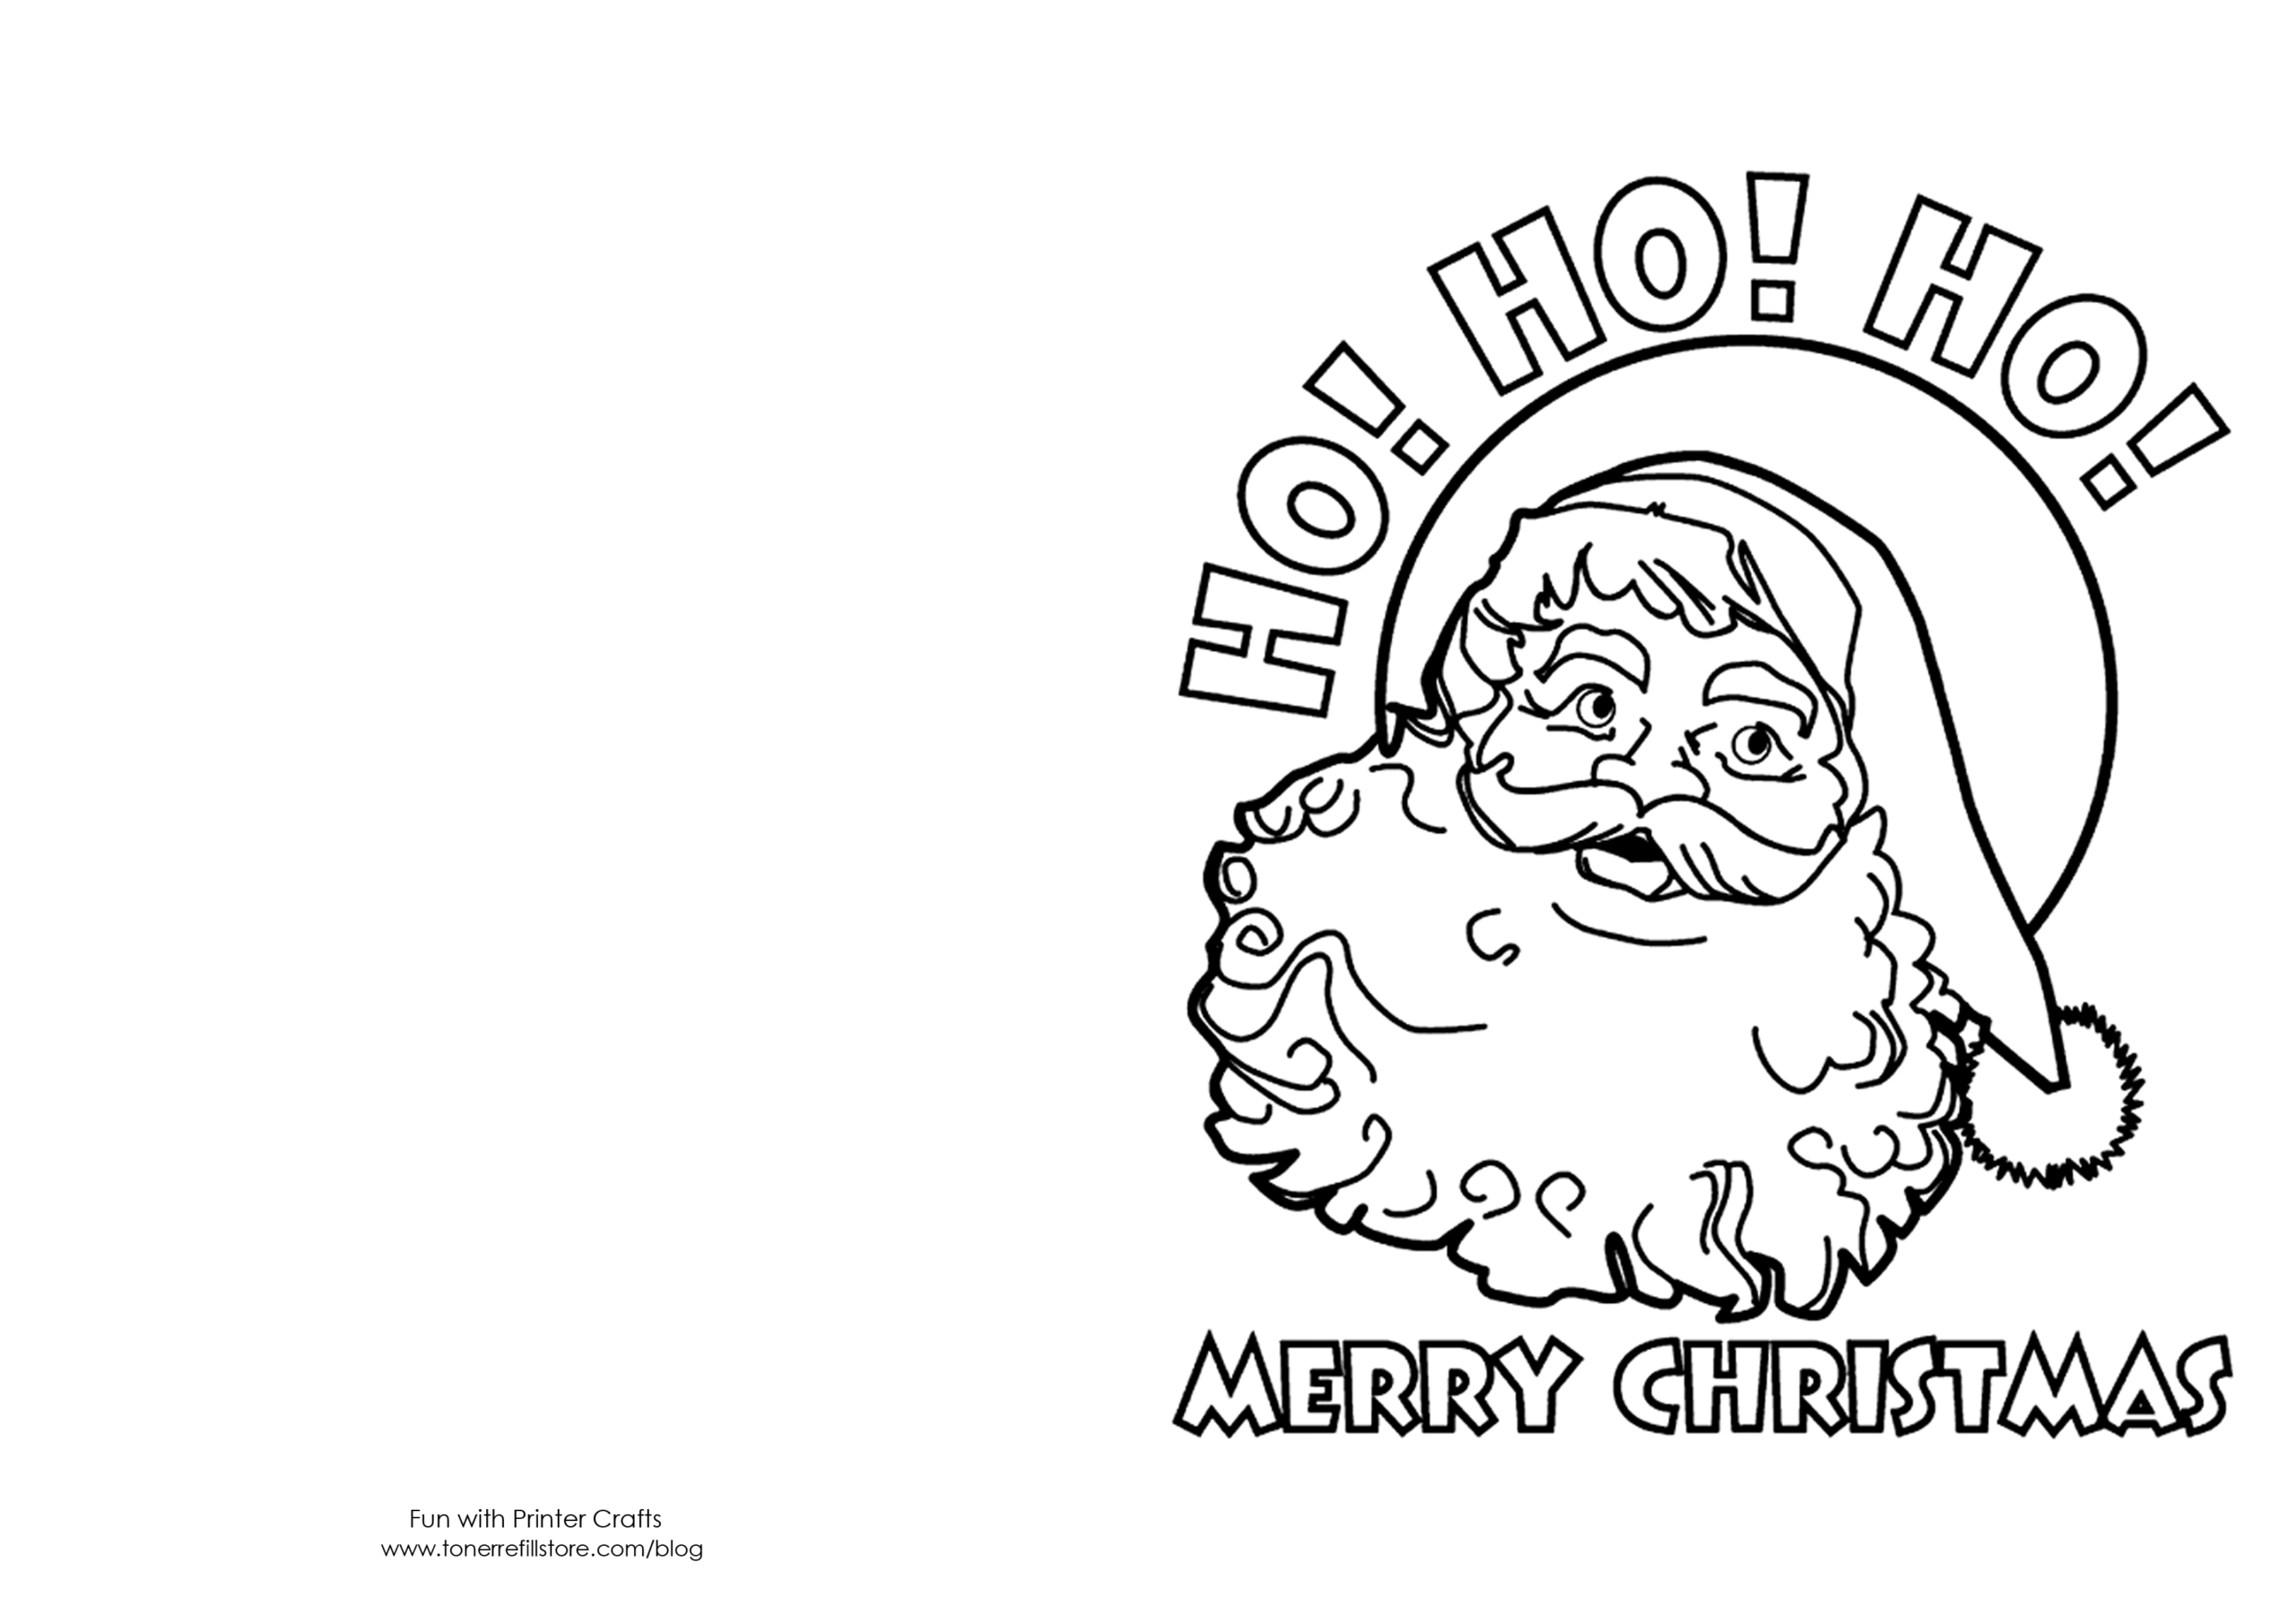 Free Christmas Card Coloring Pages Free, Download Free Clip In Printable Holiday Card Templates